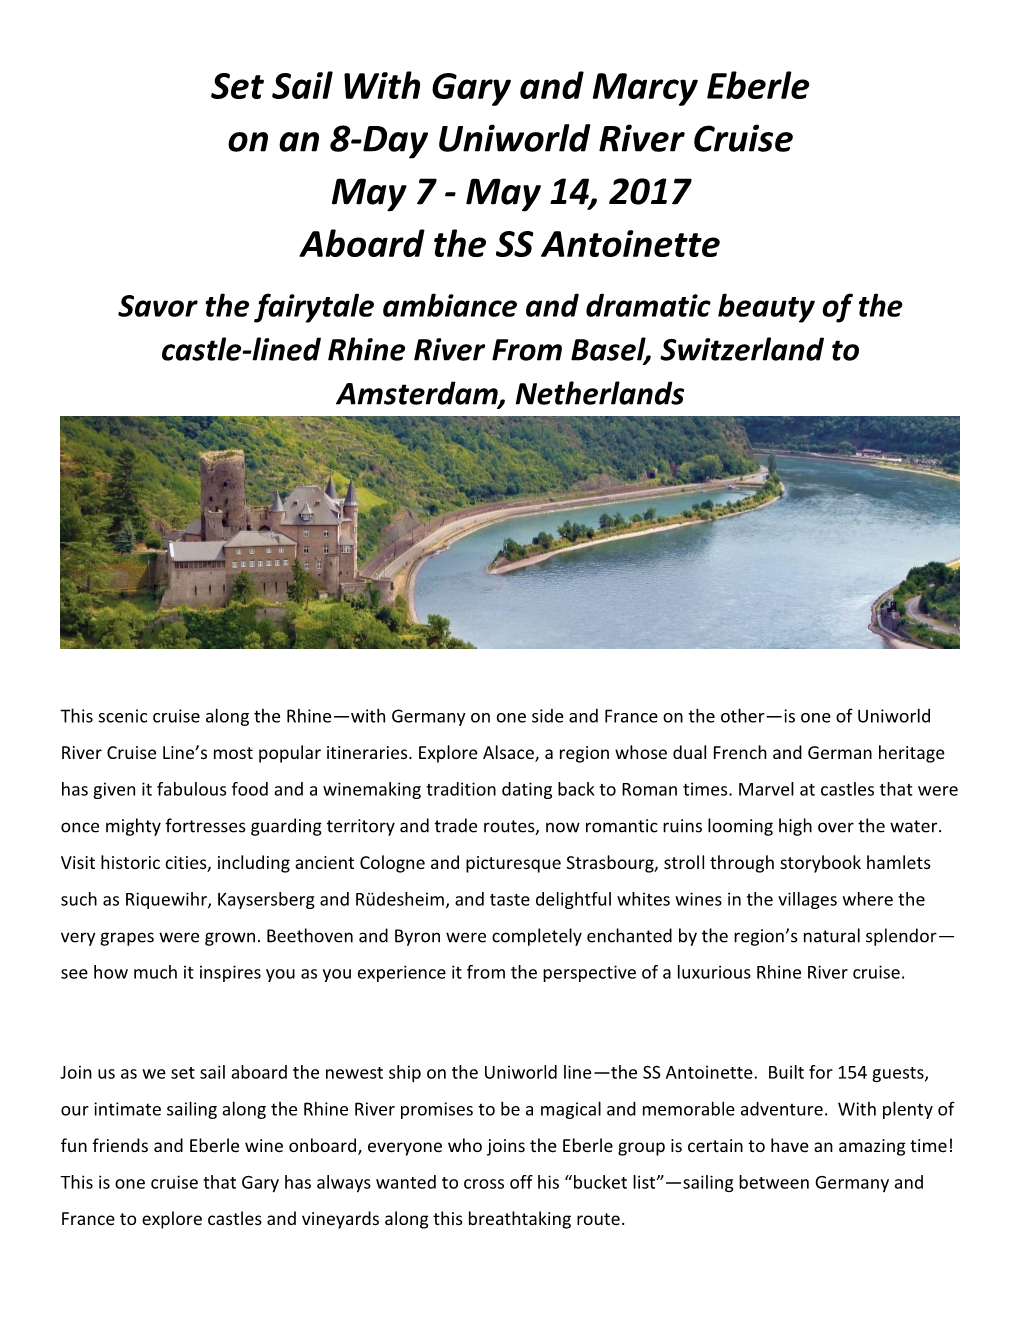 Set Sail with Gary and Marcy Eberle on an 8-Day Uniworld River Cruise May 7